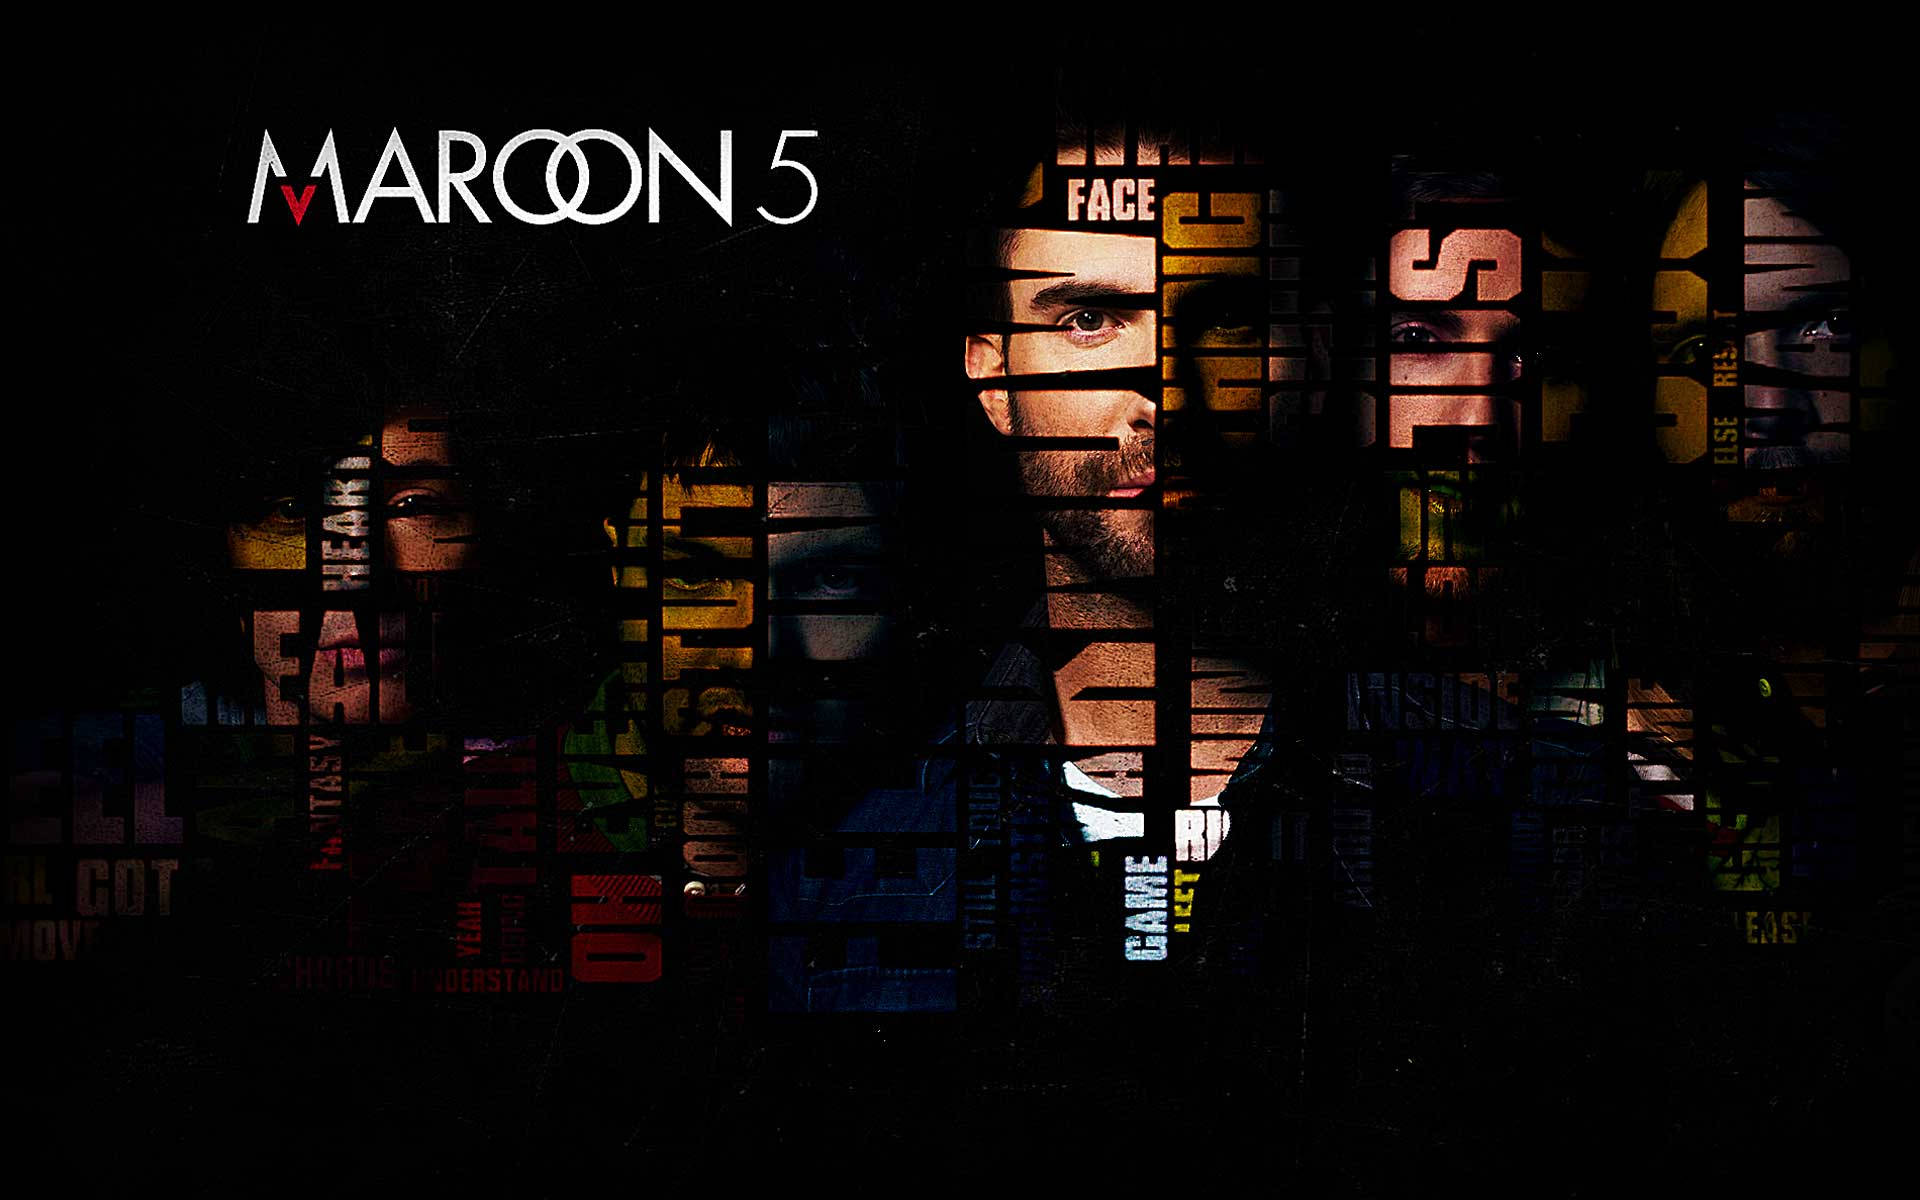 Maroon 5 Words On Faces Background